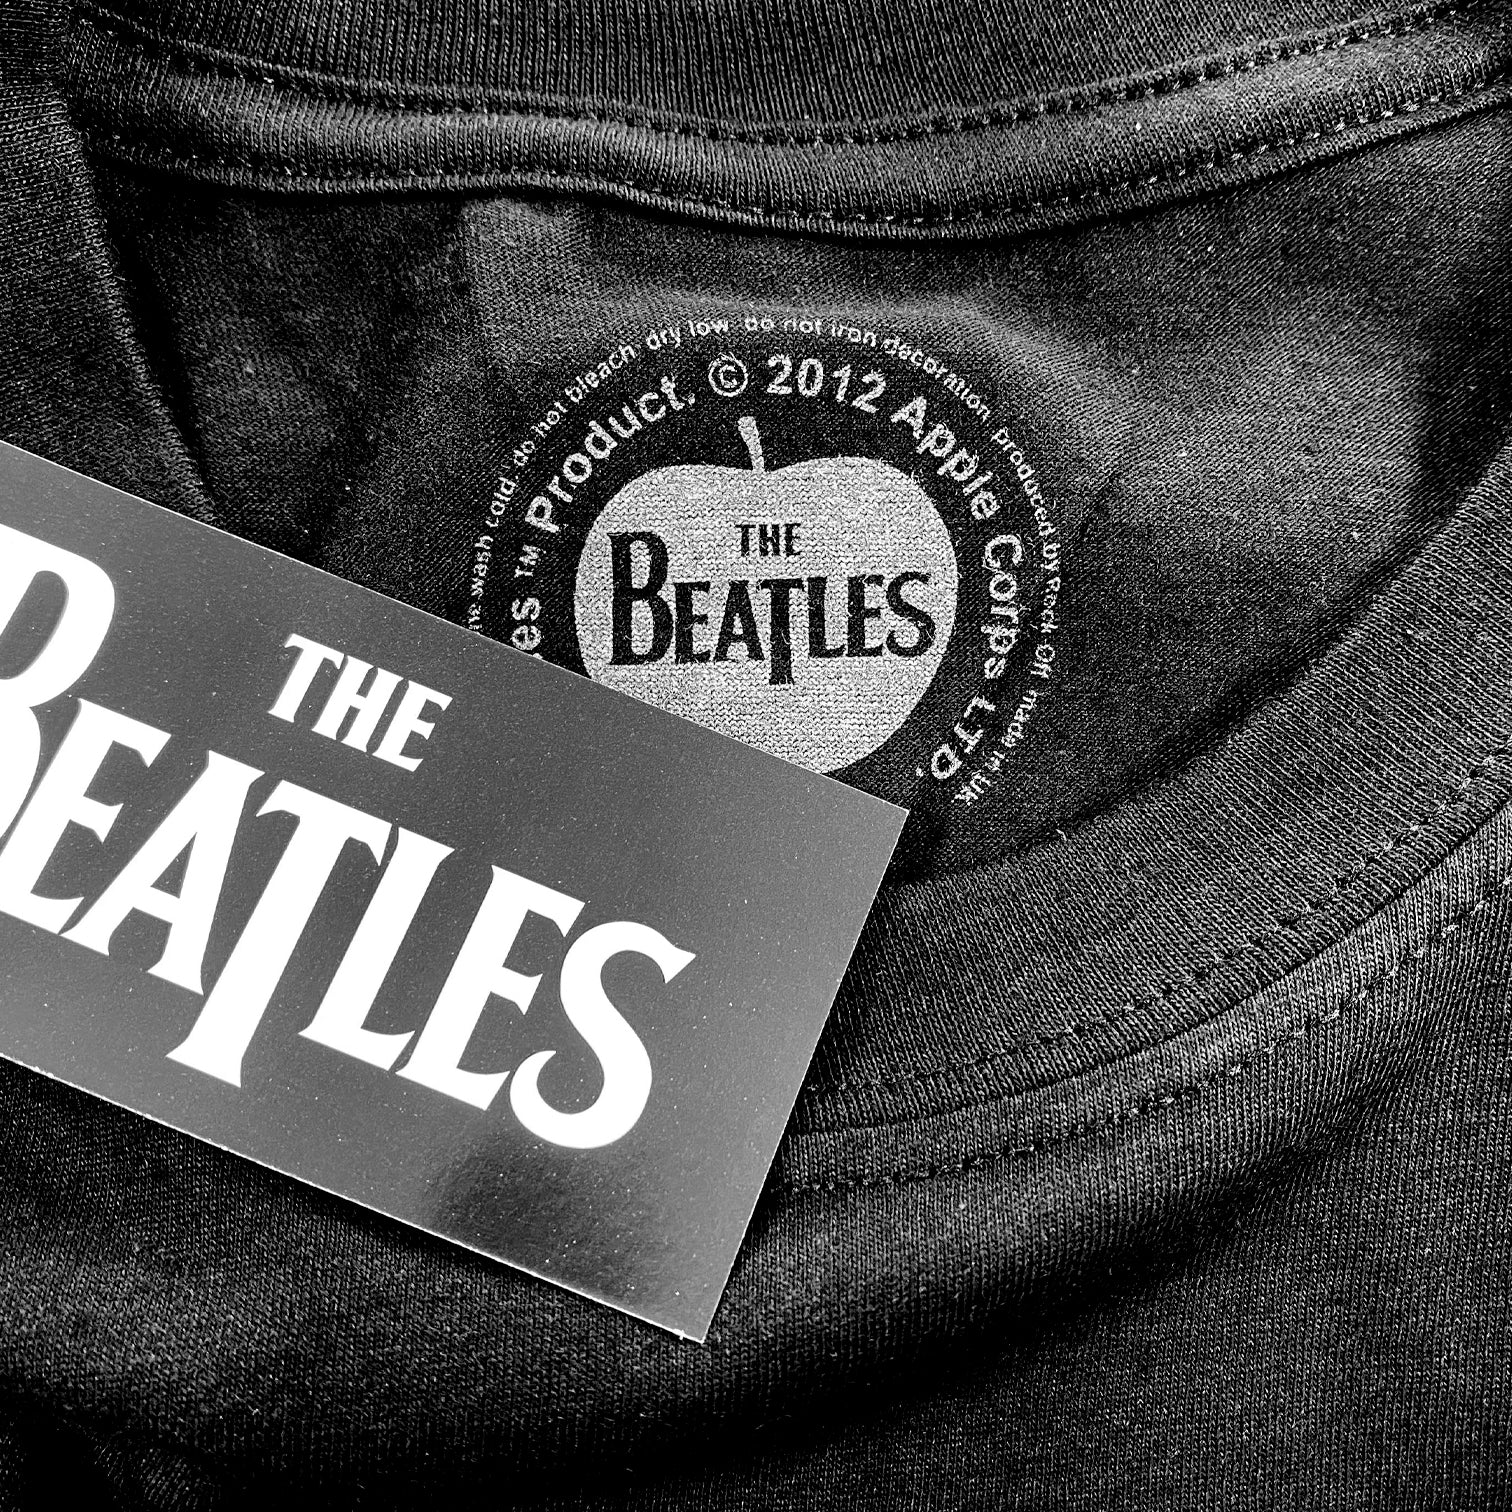 The Beatles - Classic Logo T Shirt - End Of Line